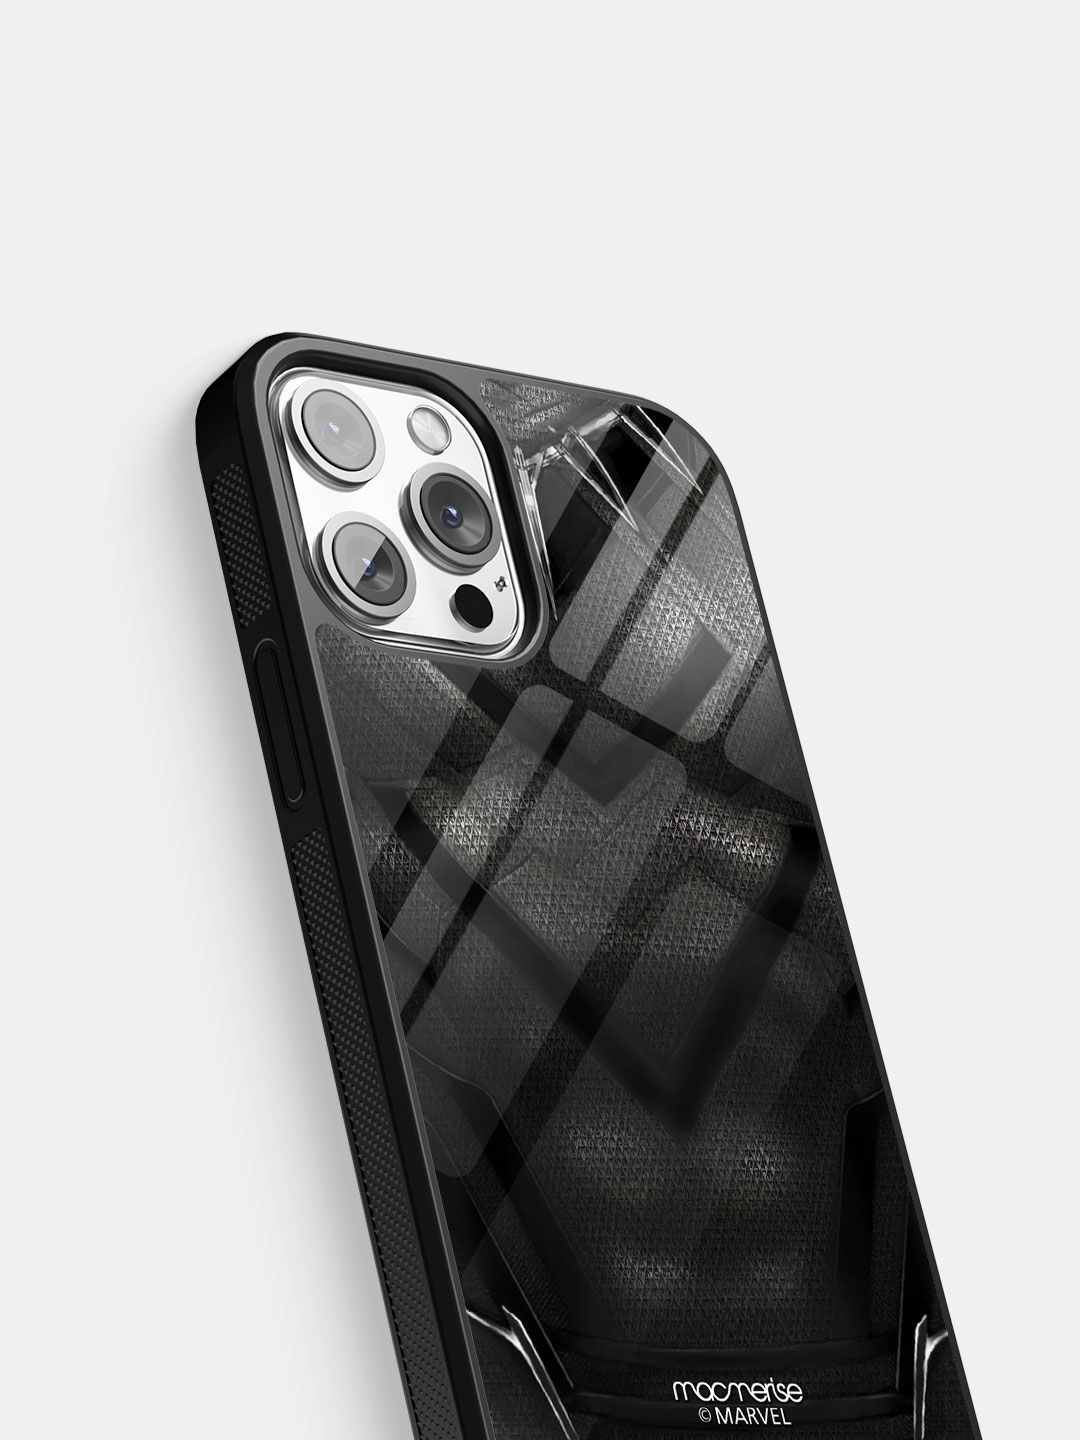 Suit up Black Panther - Glass Case For iPhone 13 Pro Max